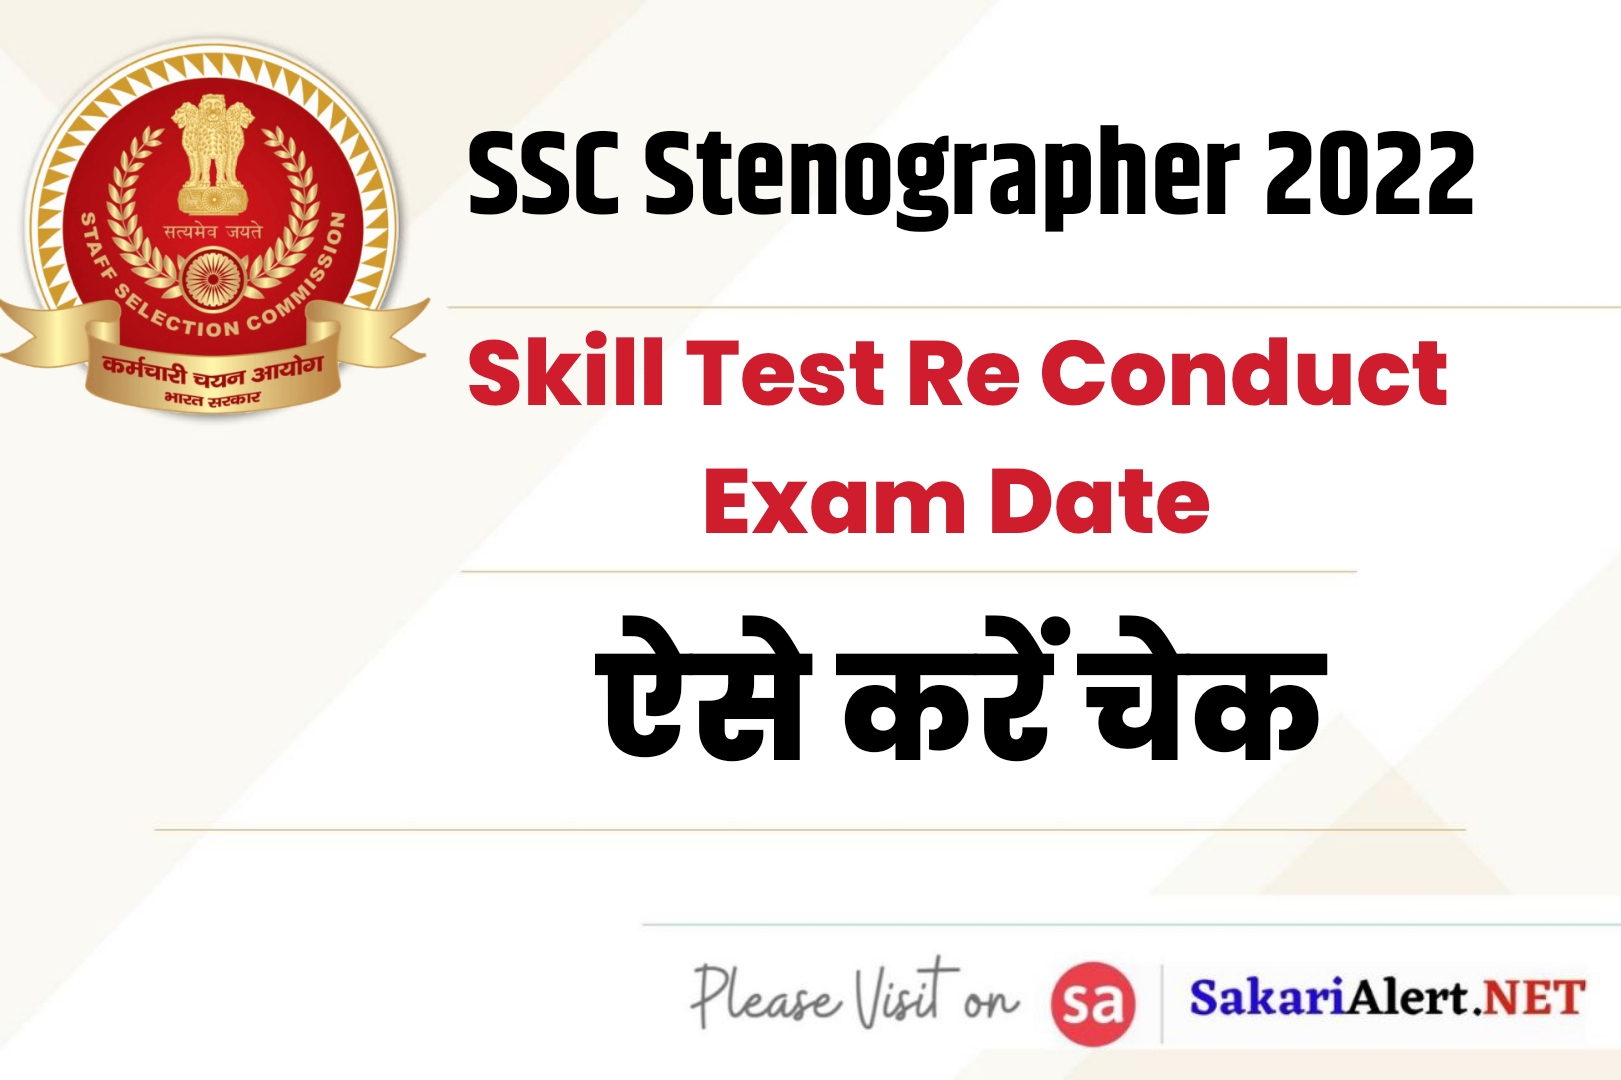 SSC Stenographer 2022 Skill Test Re Conduct Exam Date